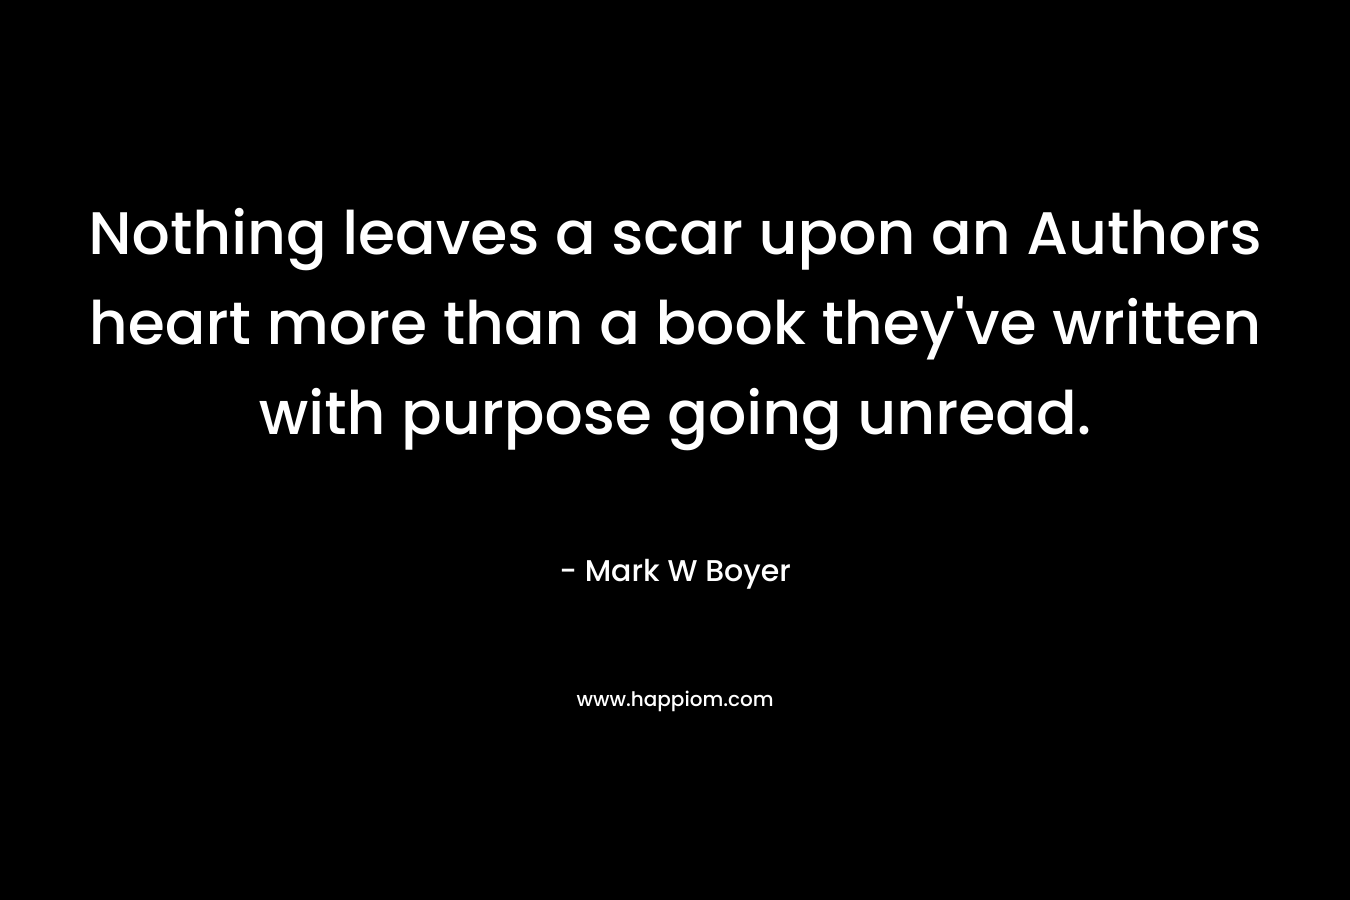 Nothing leaves a scar upon an Authors heart more than a book they’ve written with purpose going unread. – Mark W Boyer